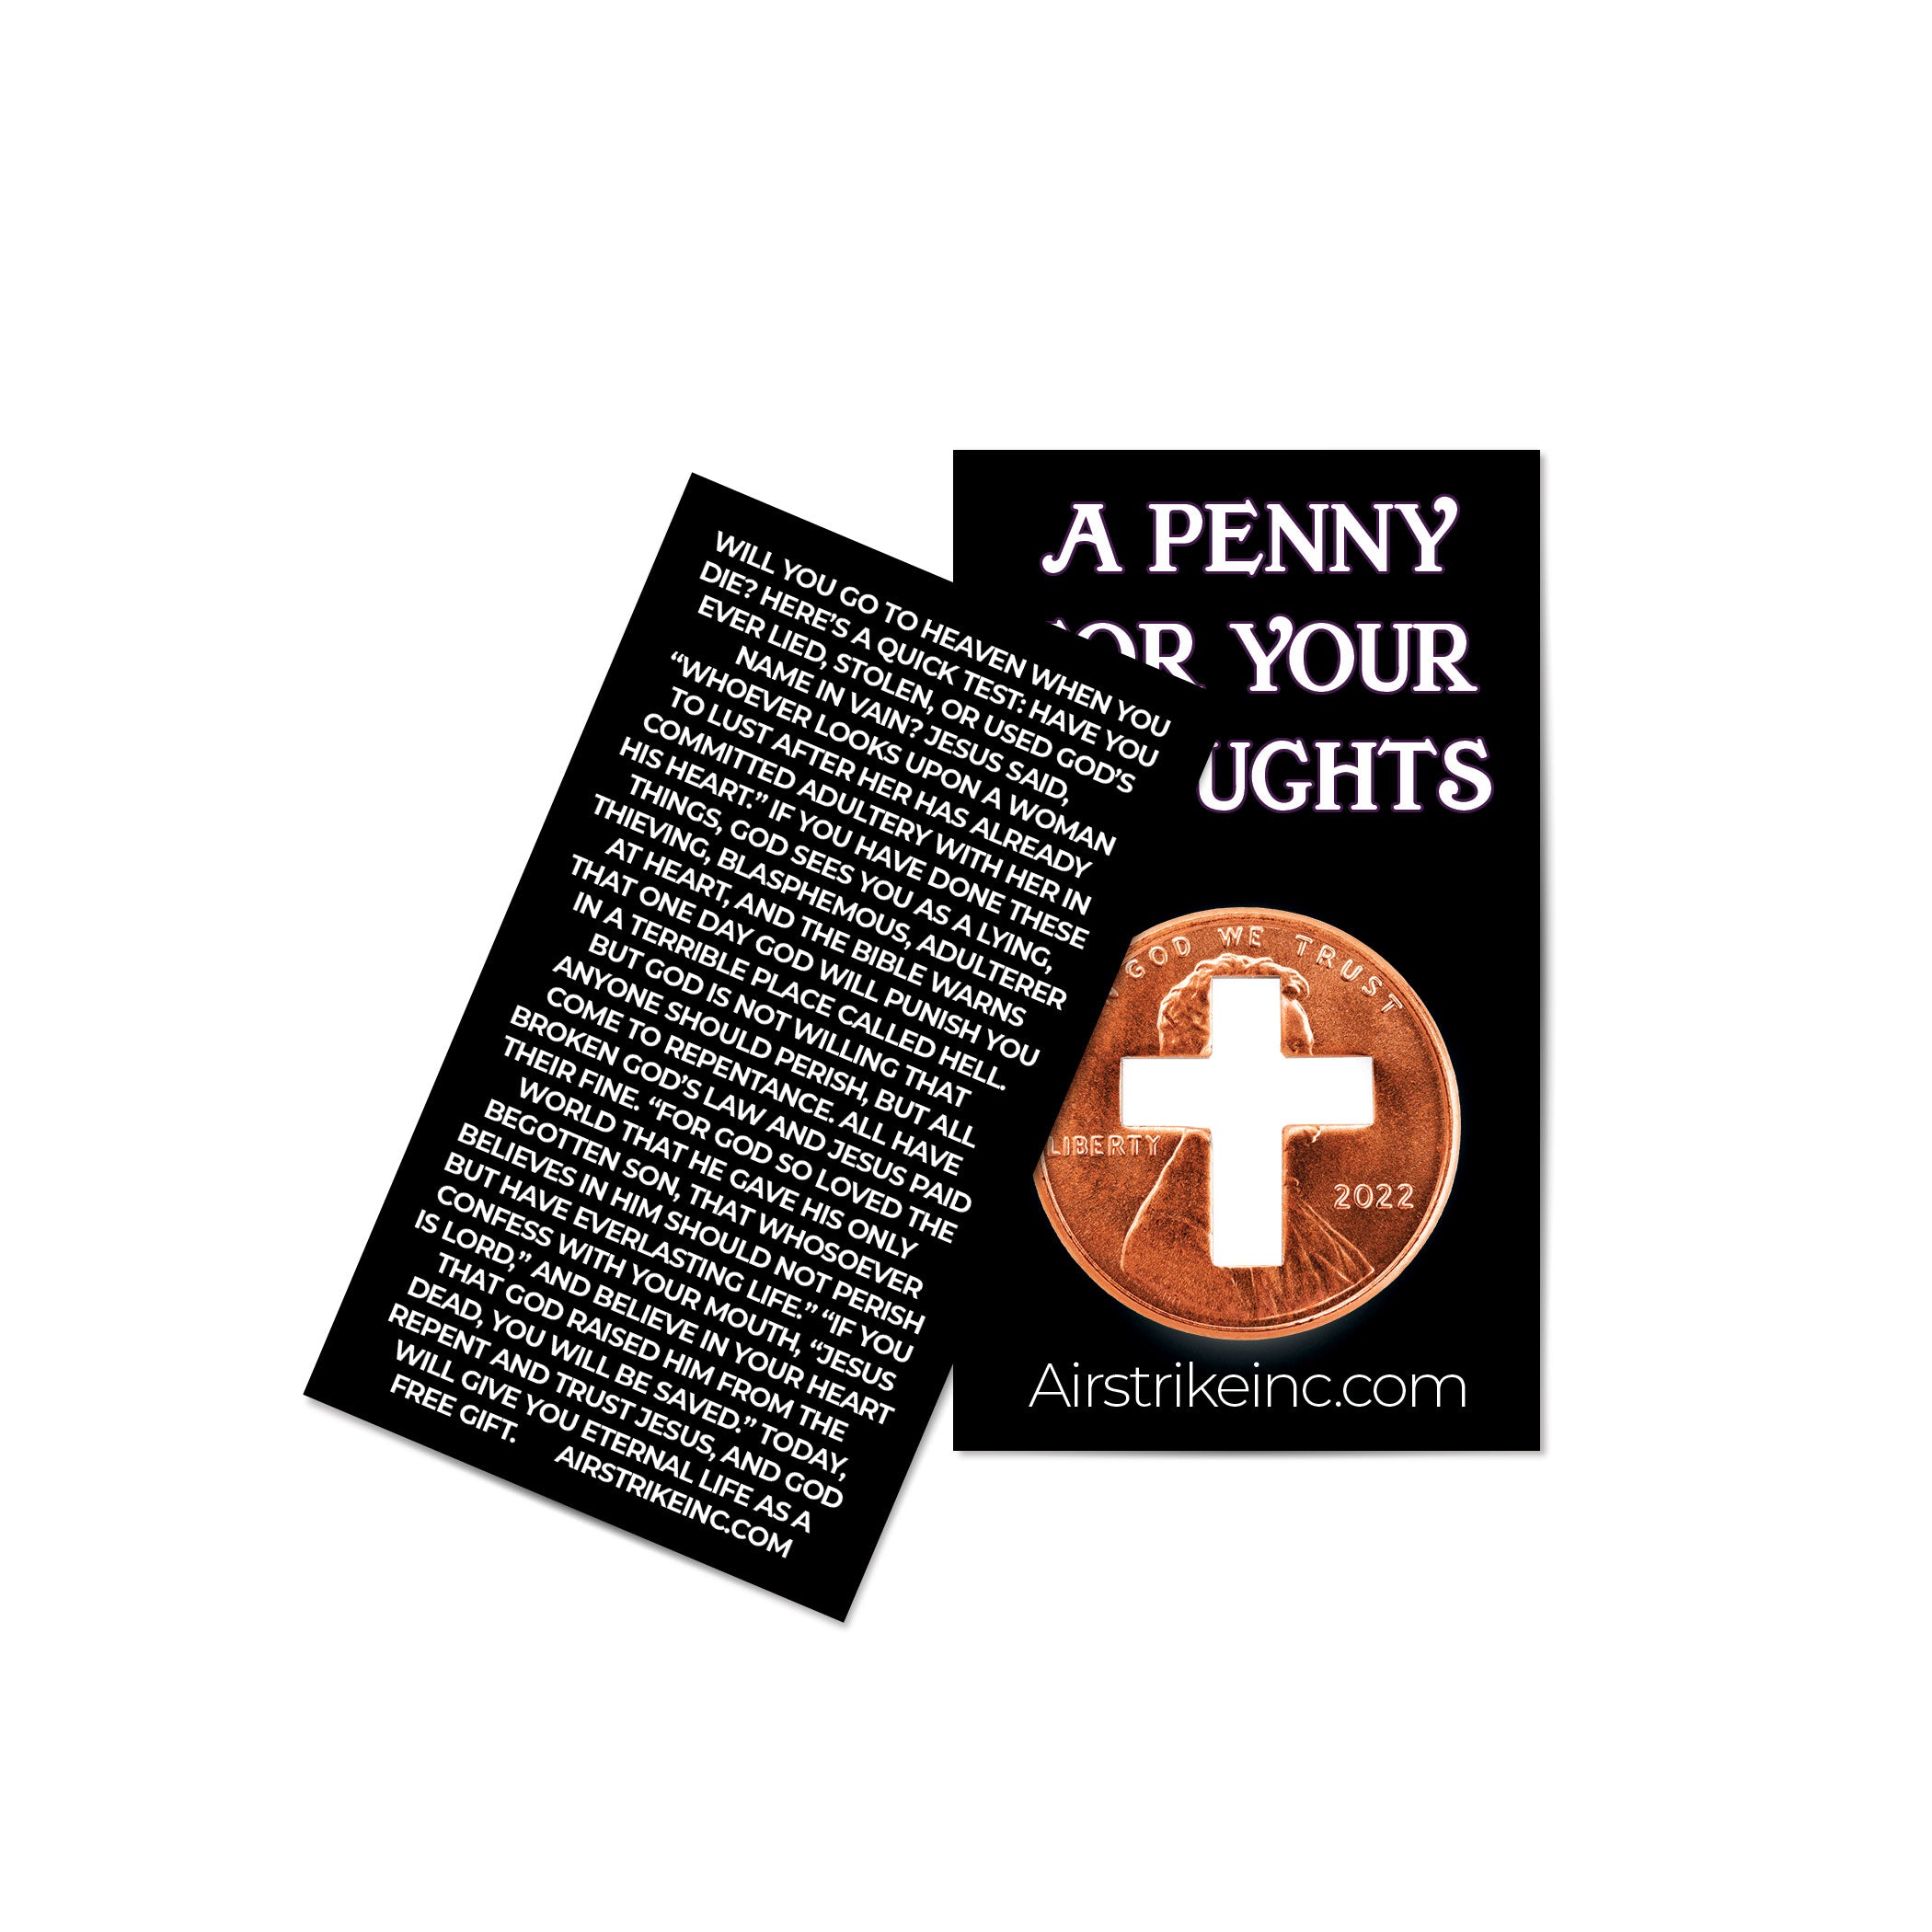 Cross Pennies From Heaven Card - A Penny For Your Thoughts